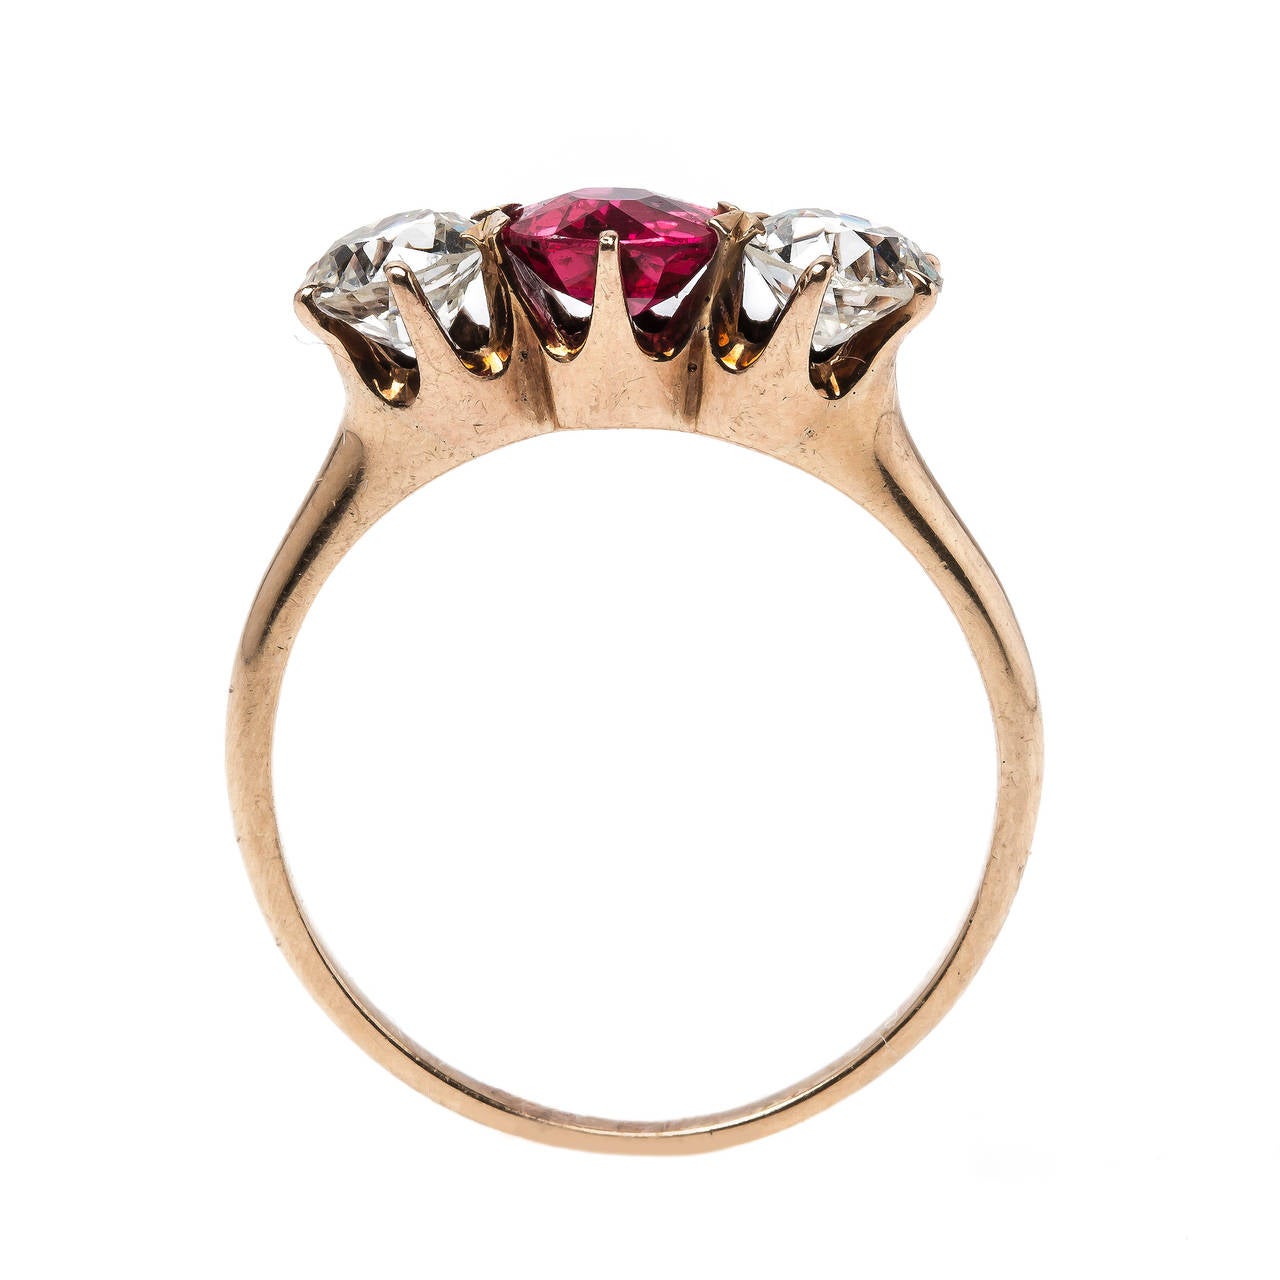 Sedona is a spectacular example of Victorian craftsmanship (circa 1870) designed in 14k rose gold featuring a stunning three stone combination. An intensely saturated orange-red round faceted spinel accompanied with a Guild Laboratories certificate